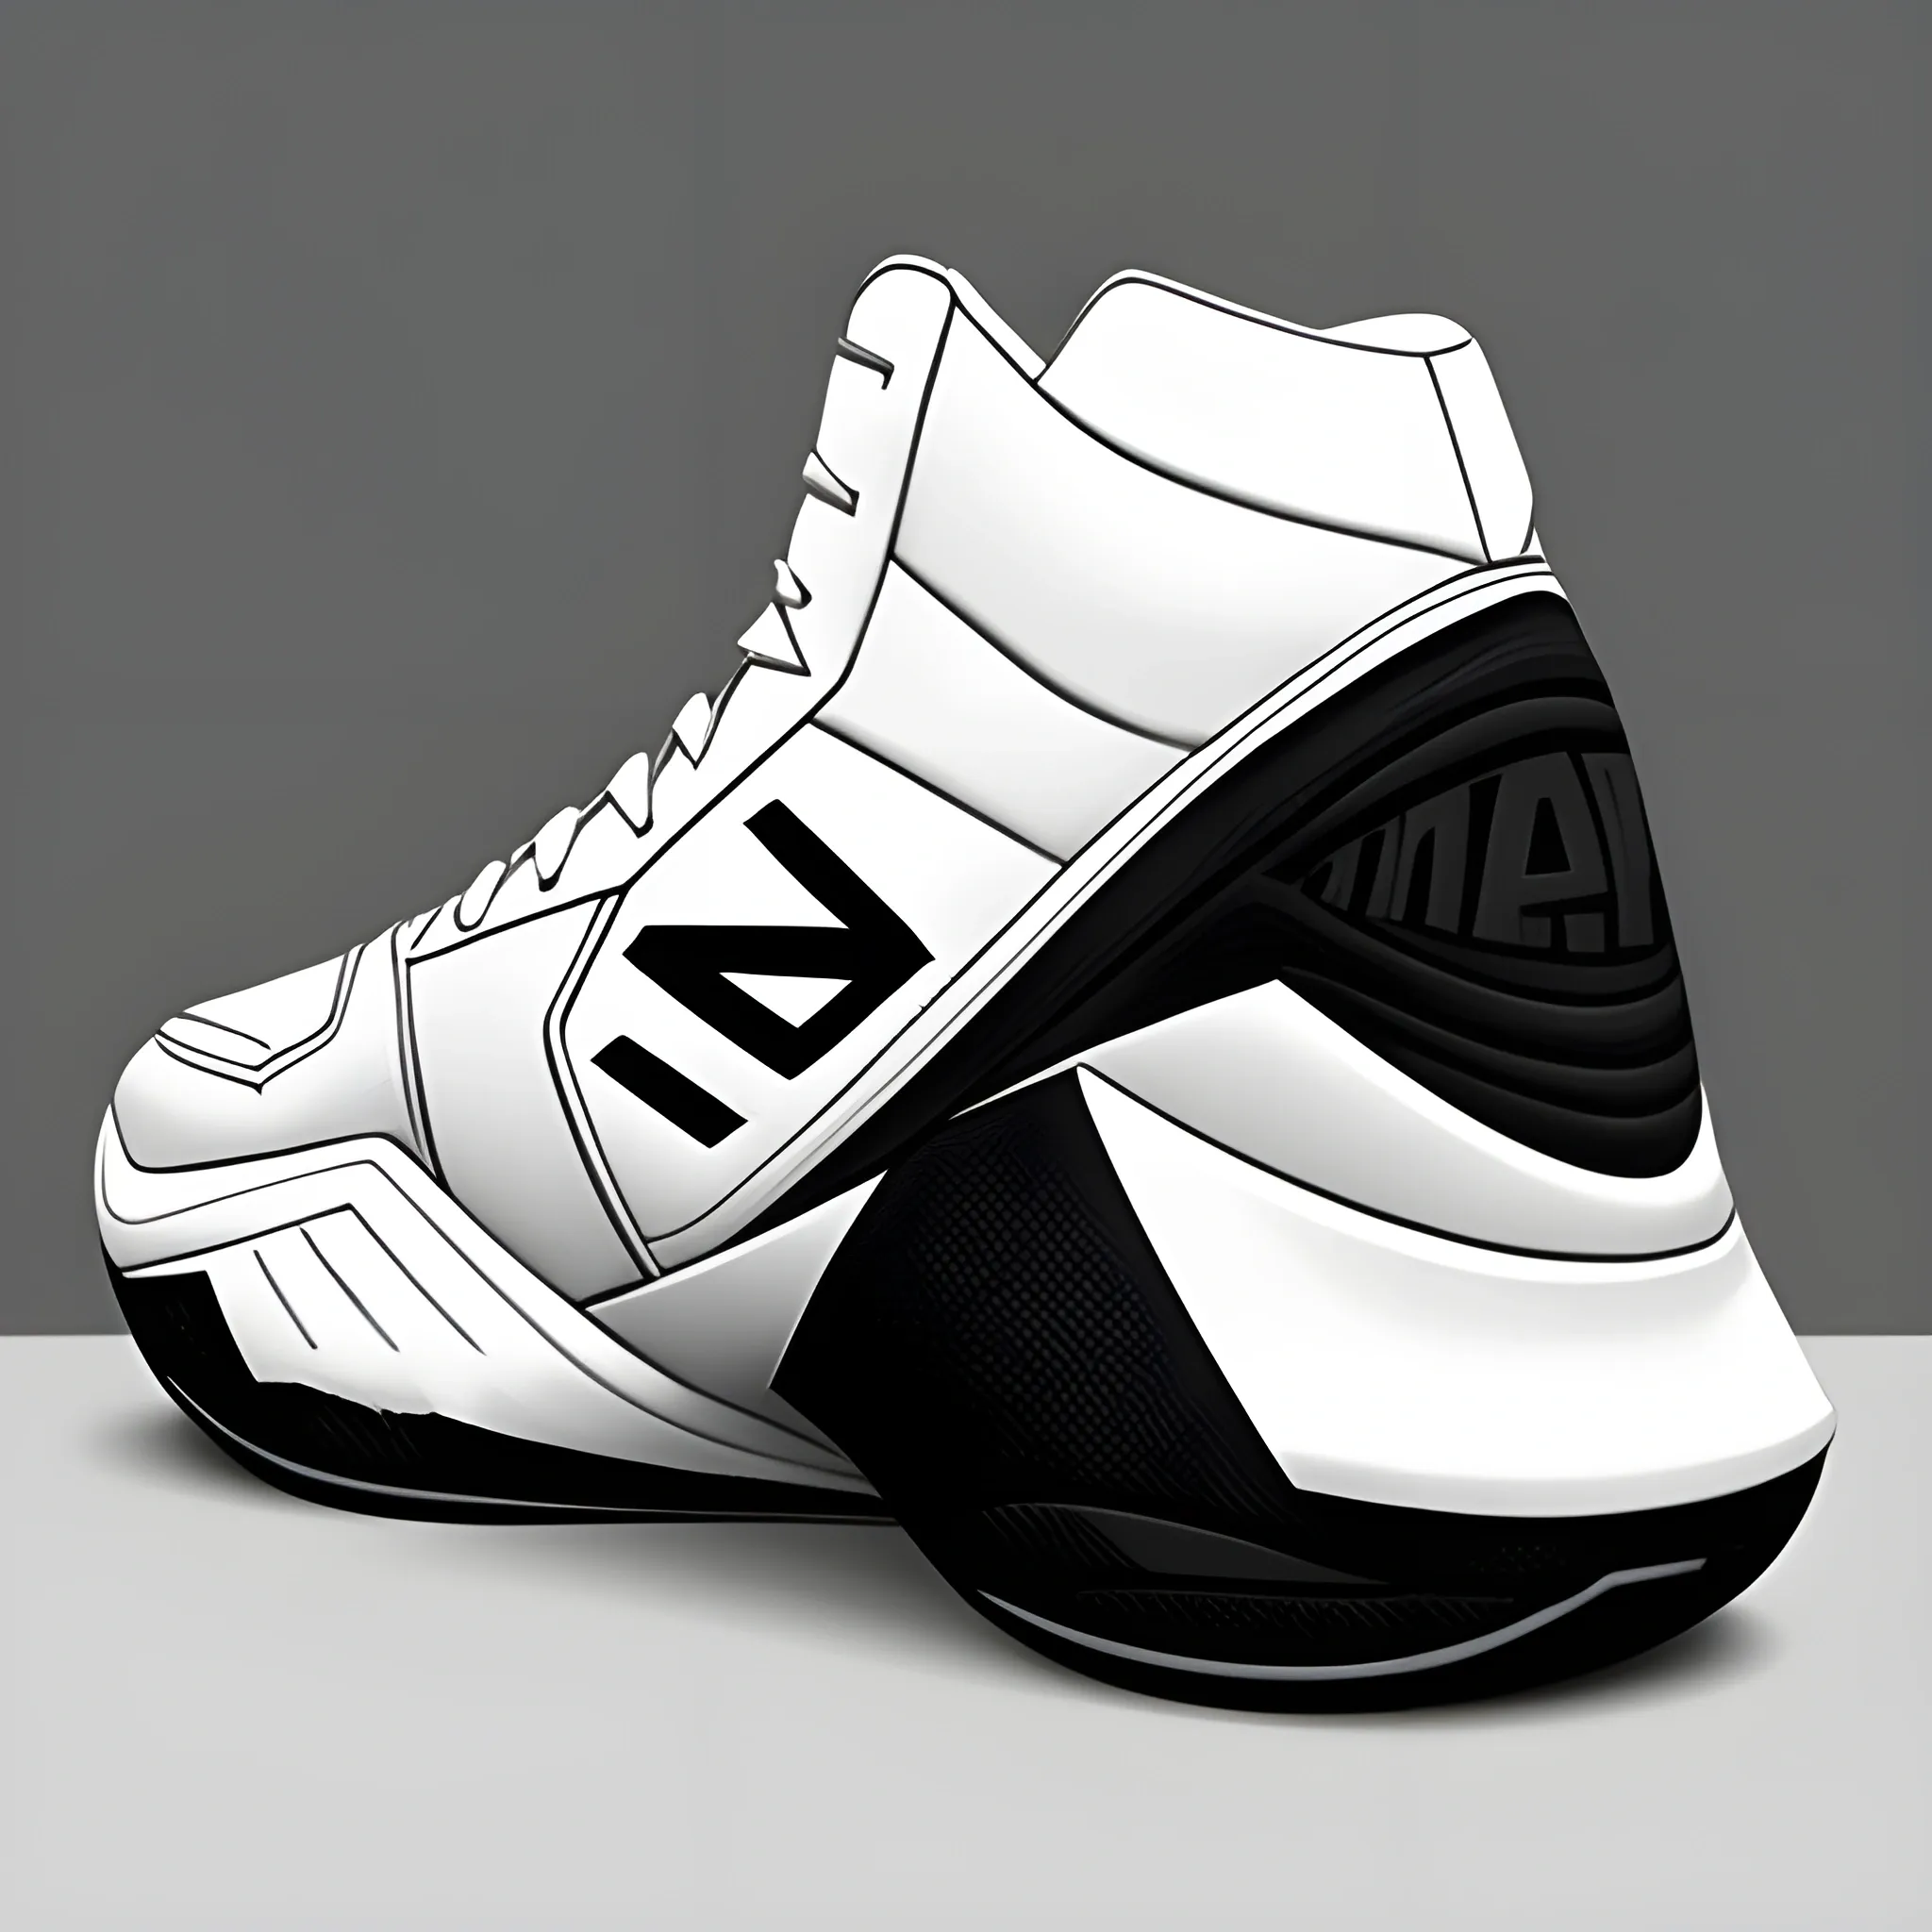 Concept Moon Knight's basketball sneakers, popular in art station, bloated, smooth, sharp focus
